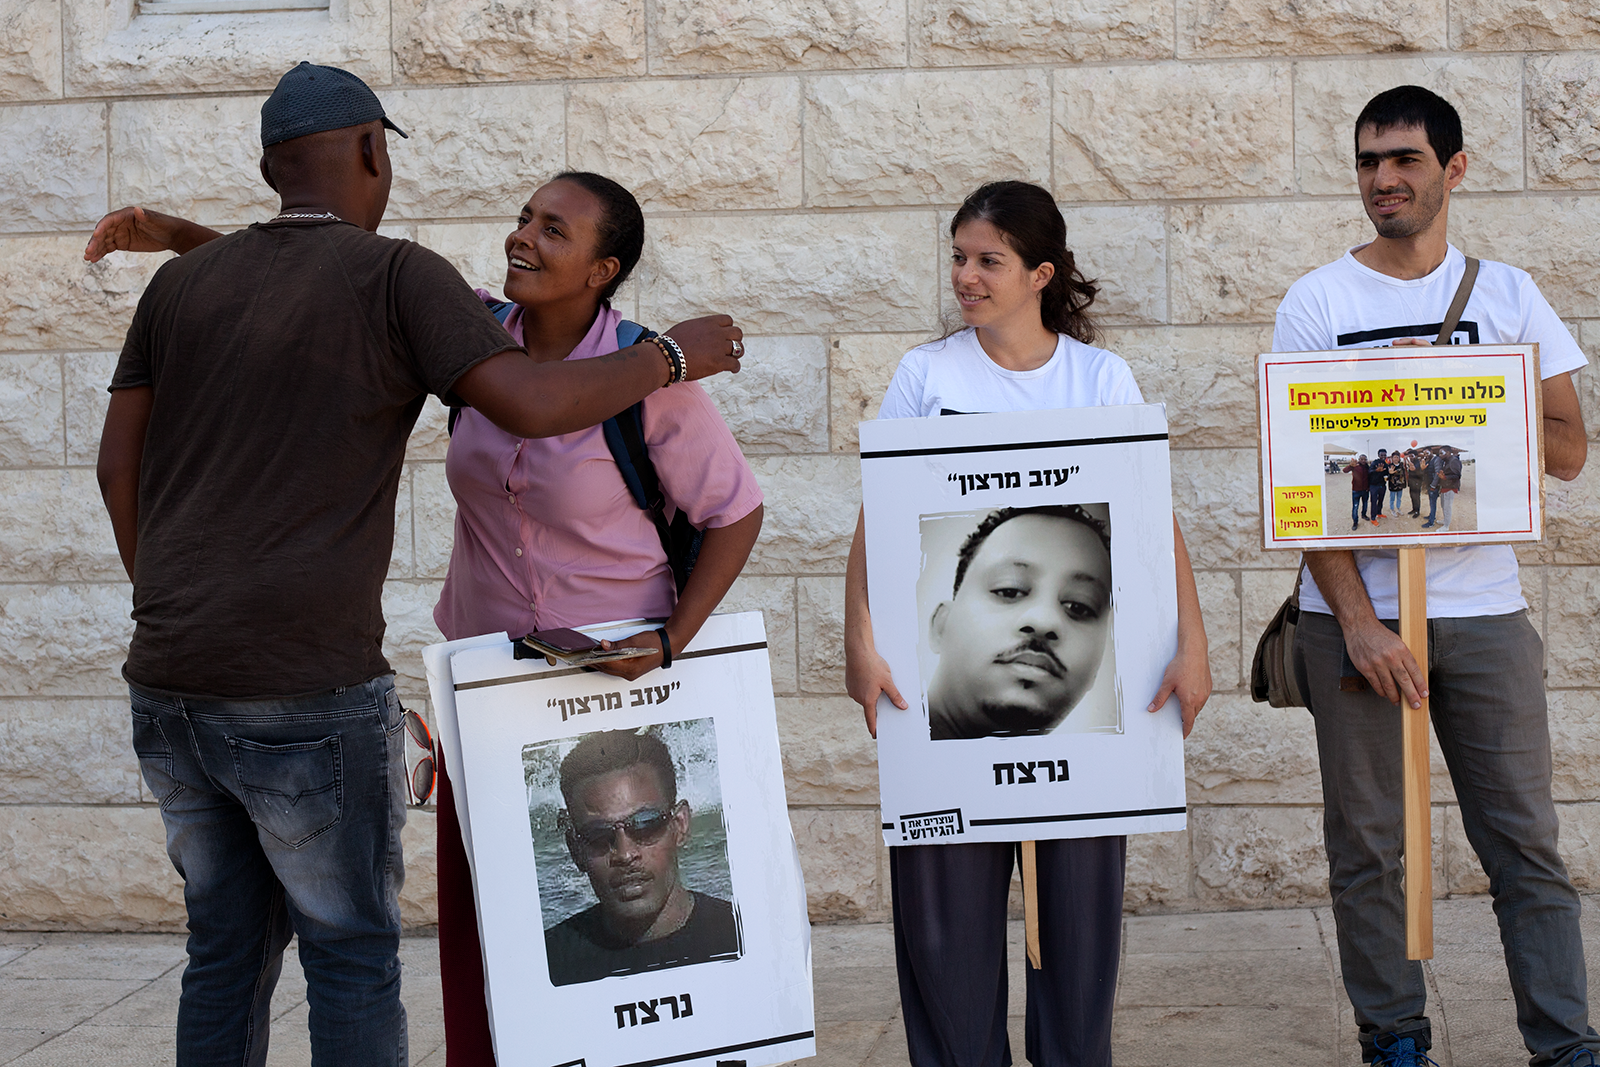 On July 24, 2018, a group of demonstrators, including Bisrat Geryasus (second from left), protest Israel's "Deposit Law" outside the country's Supreme Court. Image by Caron Creighton. Israel, 2018. From Caron Creighton's Pulitzer Center student fellow project, "Eritrean and Sudanese Asylum Seekers in Israel."